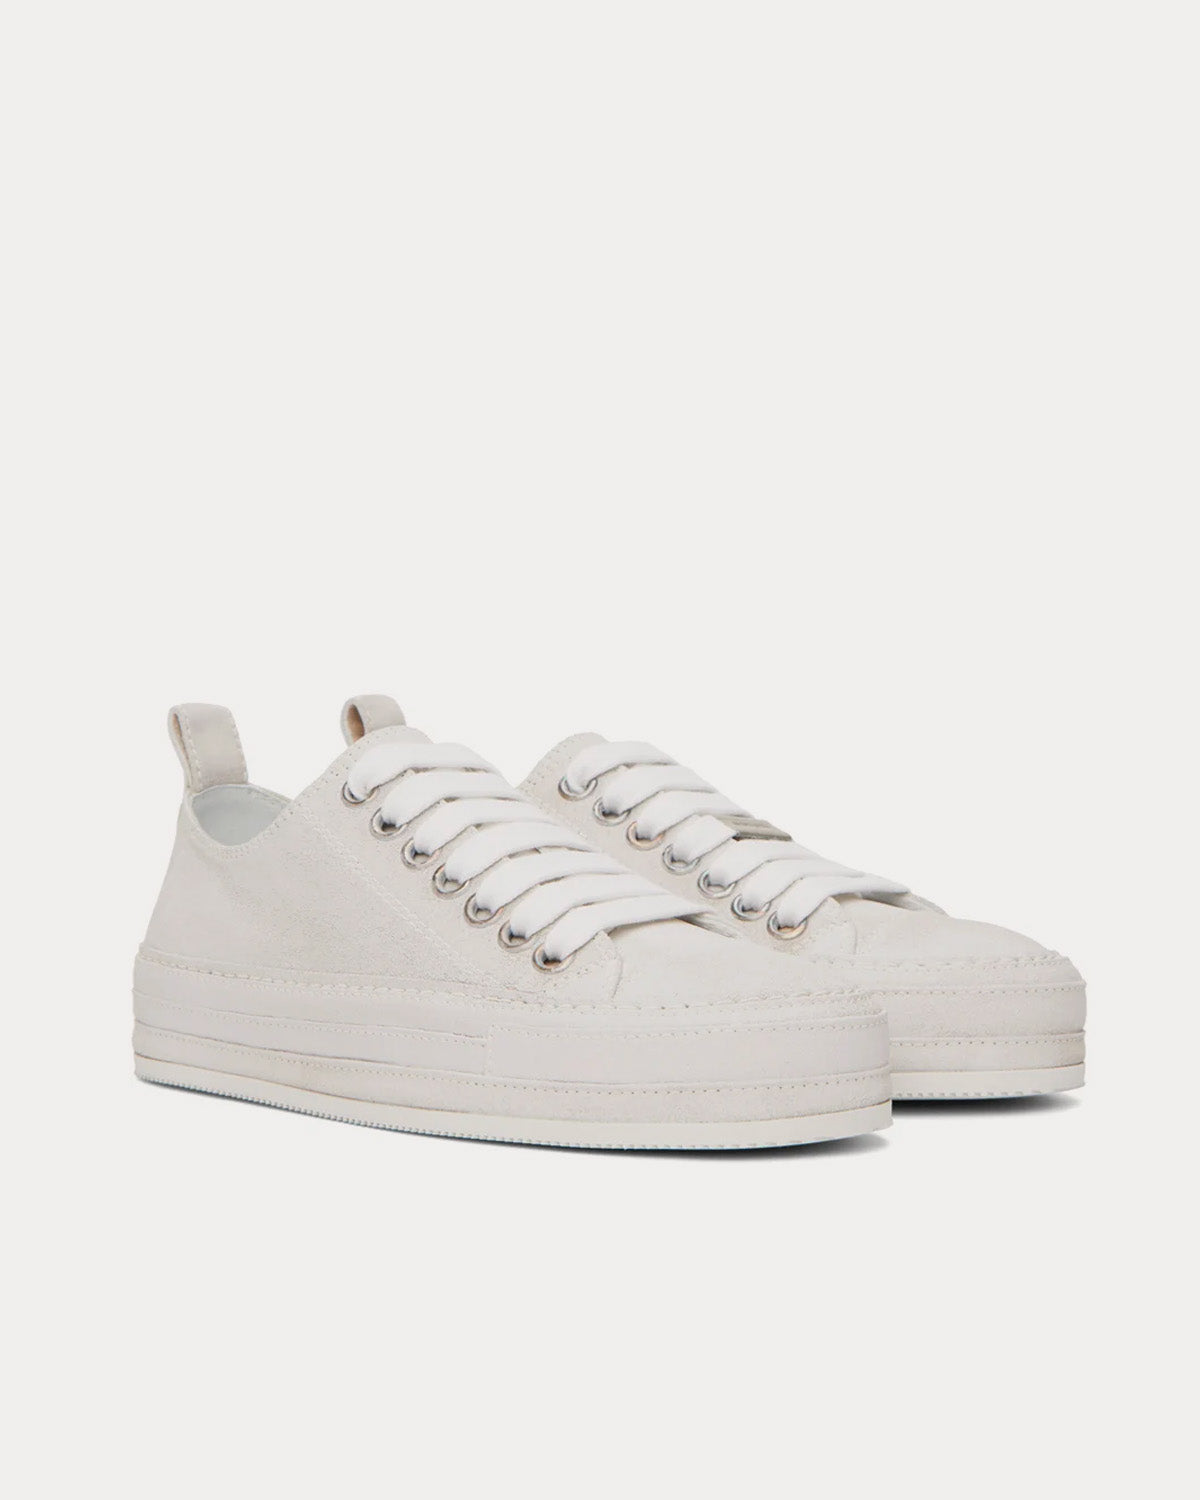 Ann Demeulemeester - Gert Leather White Low Top Sneakers